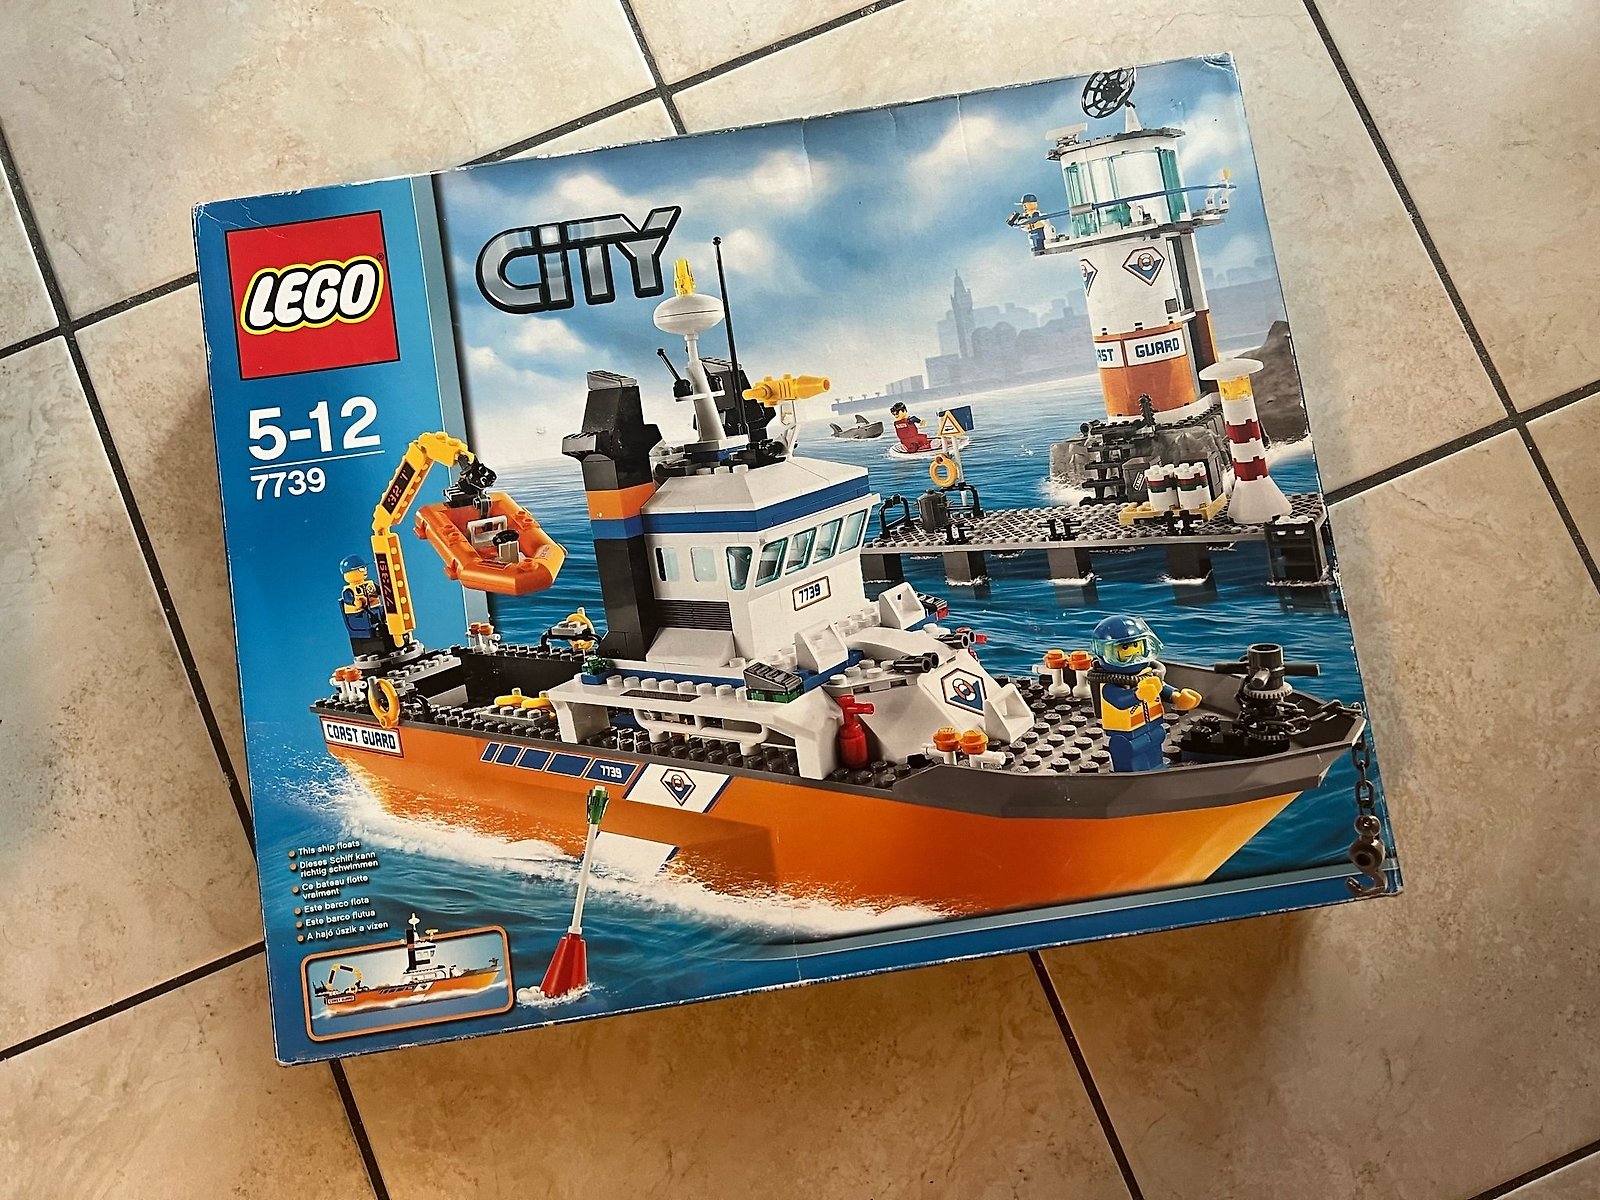 LEGO for Sale in Online Auctions - Catawiki